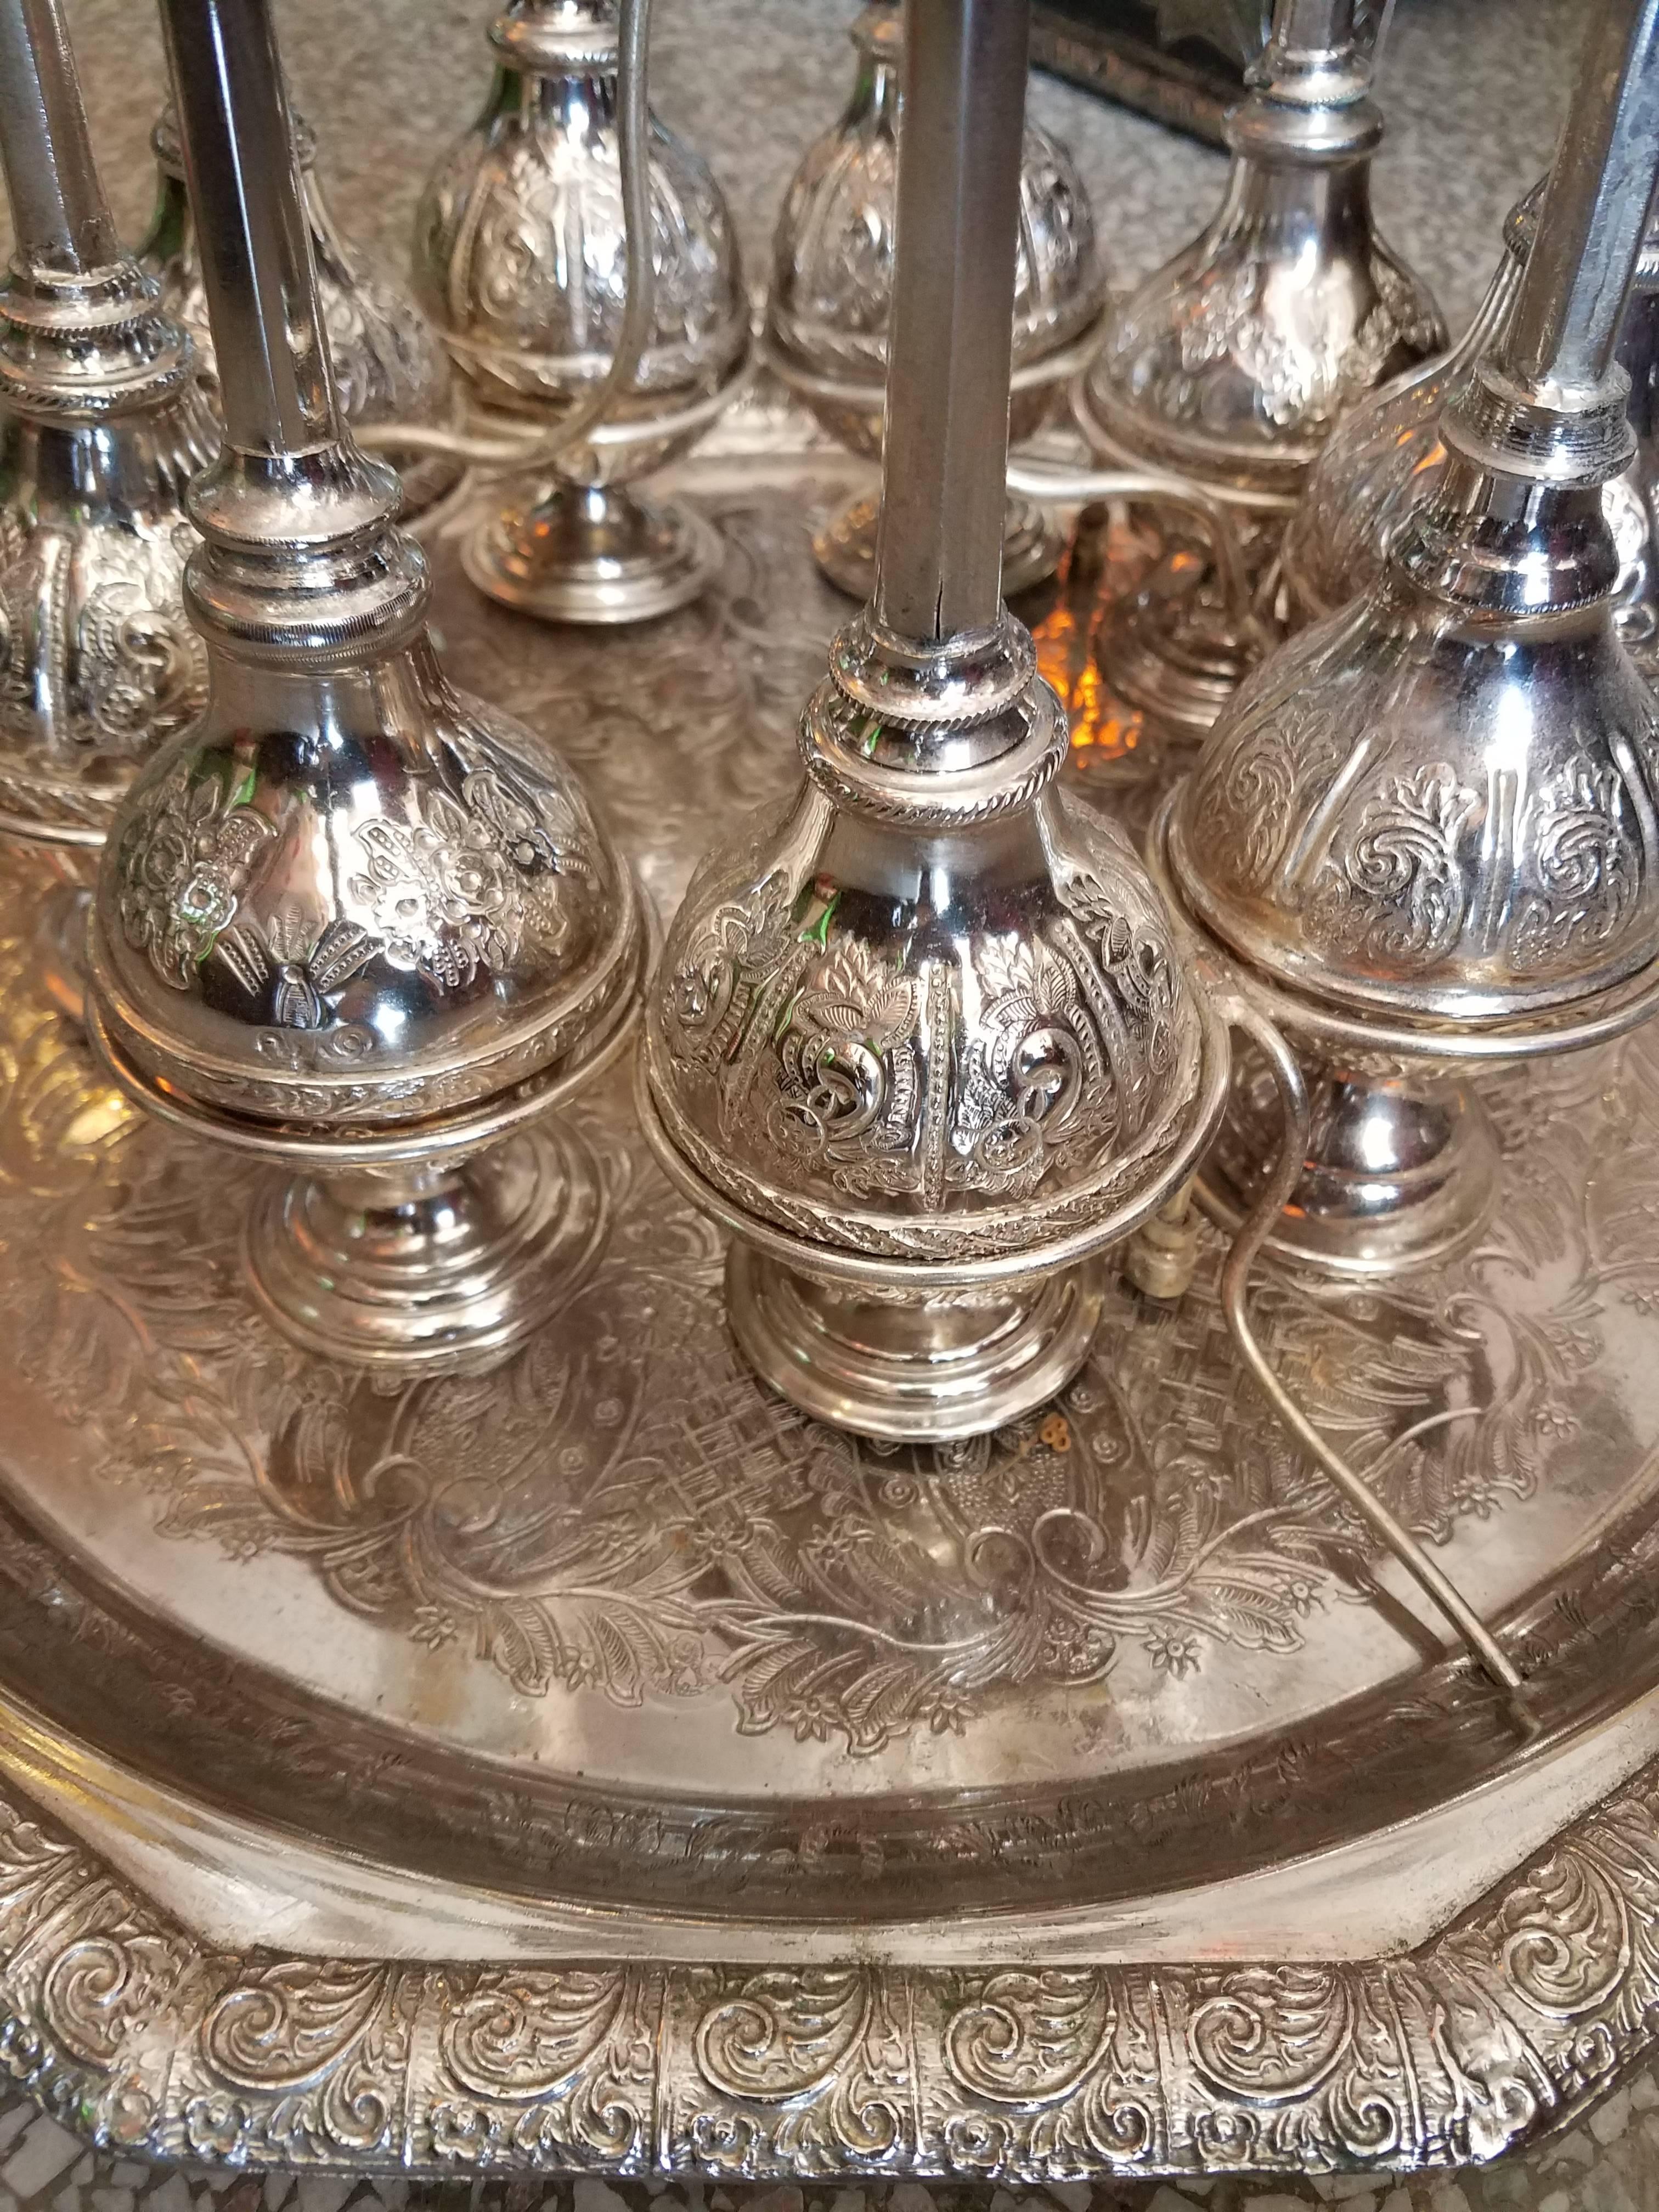 Vintage/authentic Moroccan set of silver rosewater bottles, total of nine, a silver handle and a silver tray. Each dispenser can be filled with rosewater or orange blossom water and each nozzle has piercings from which rosewater can be sprinkled.